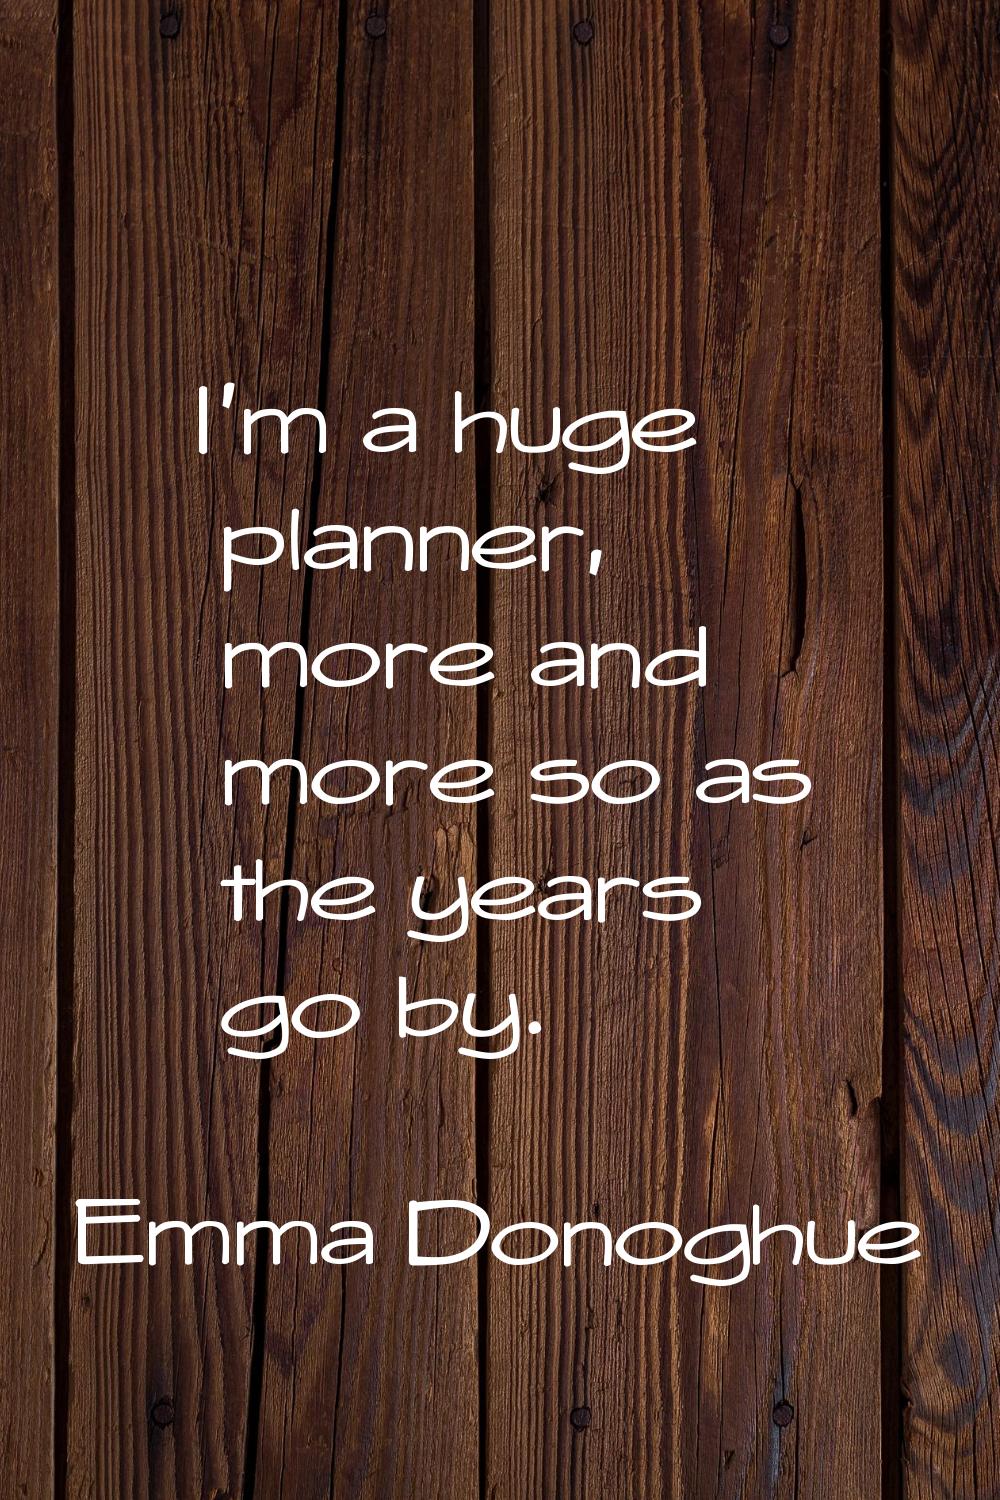 I'm a huge planner, more and more so as the years go by.